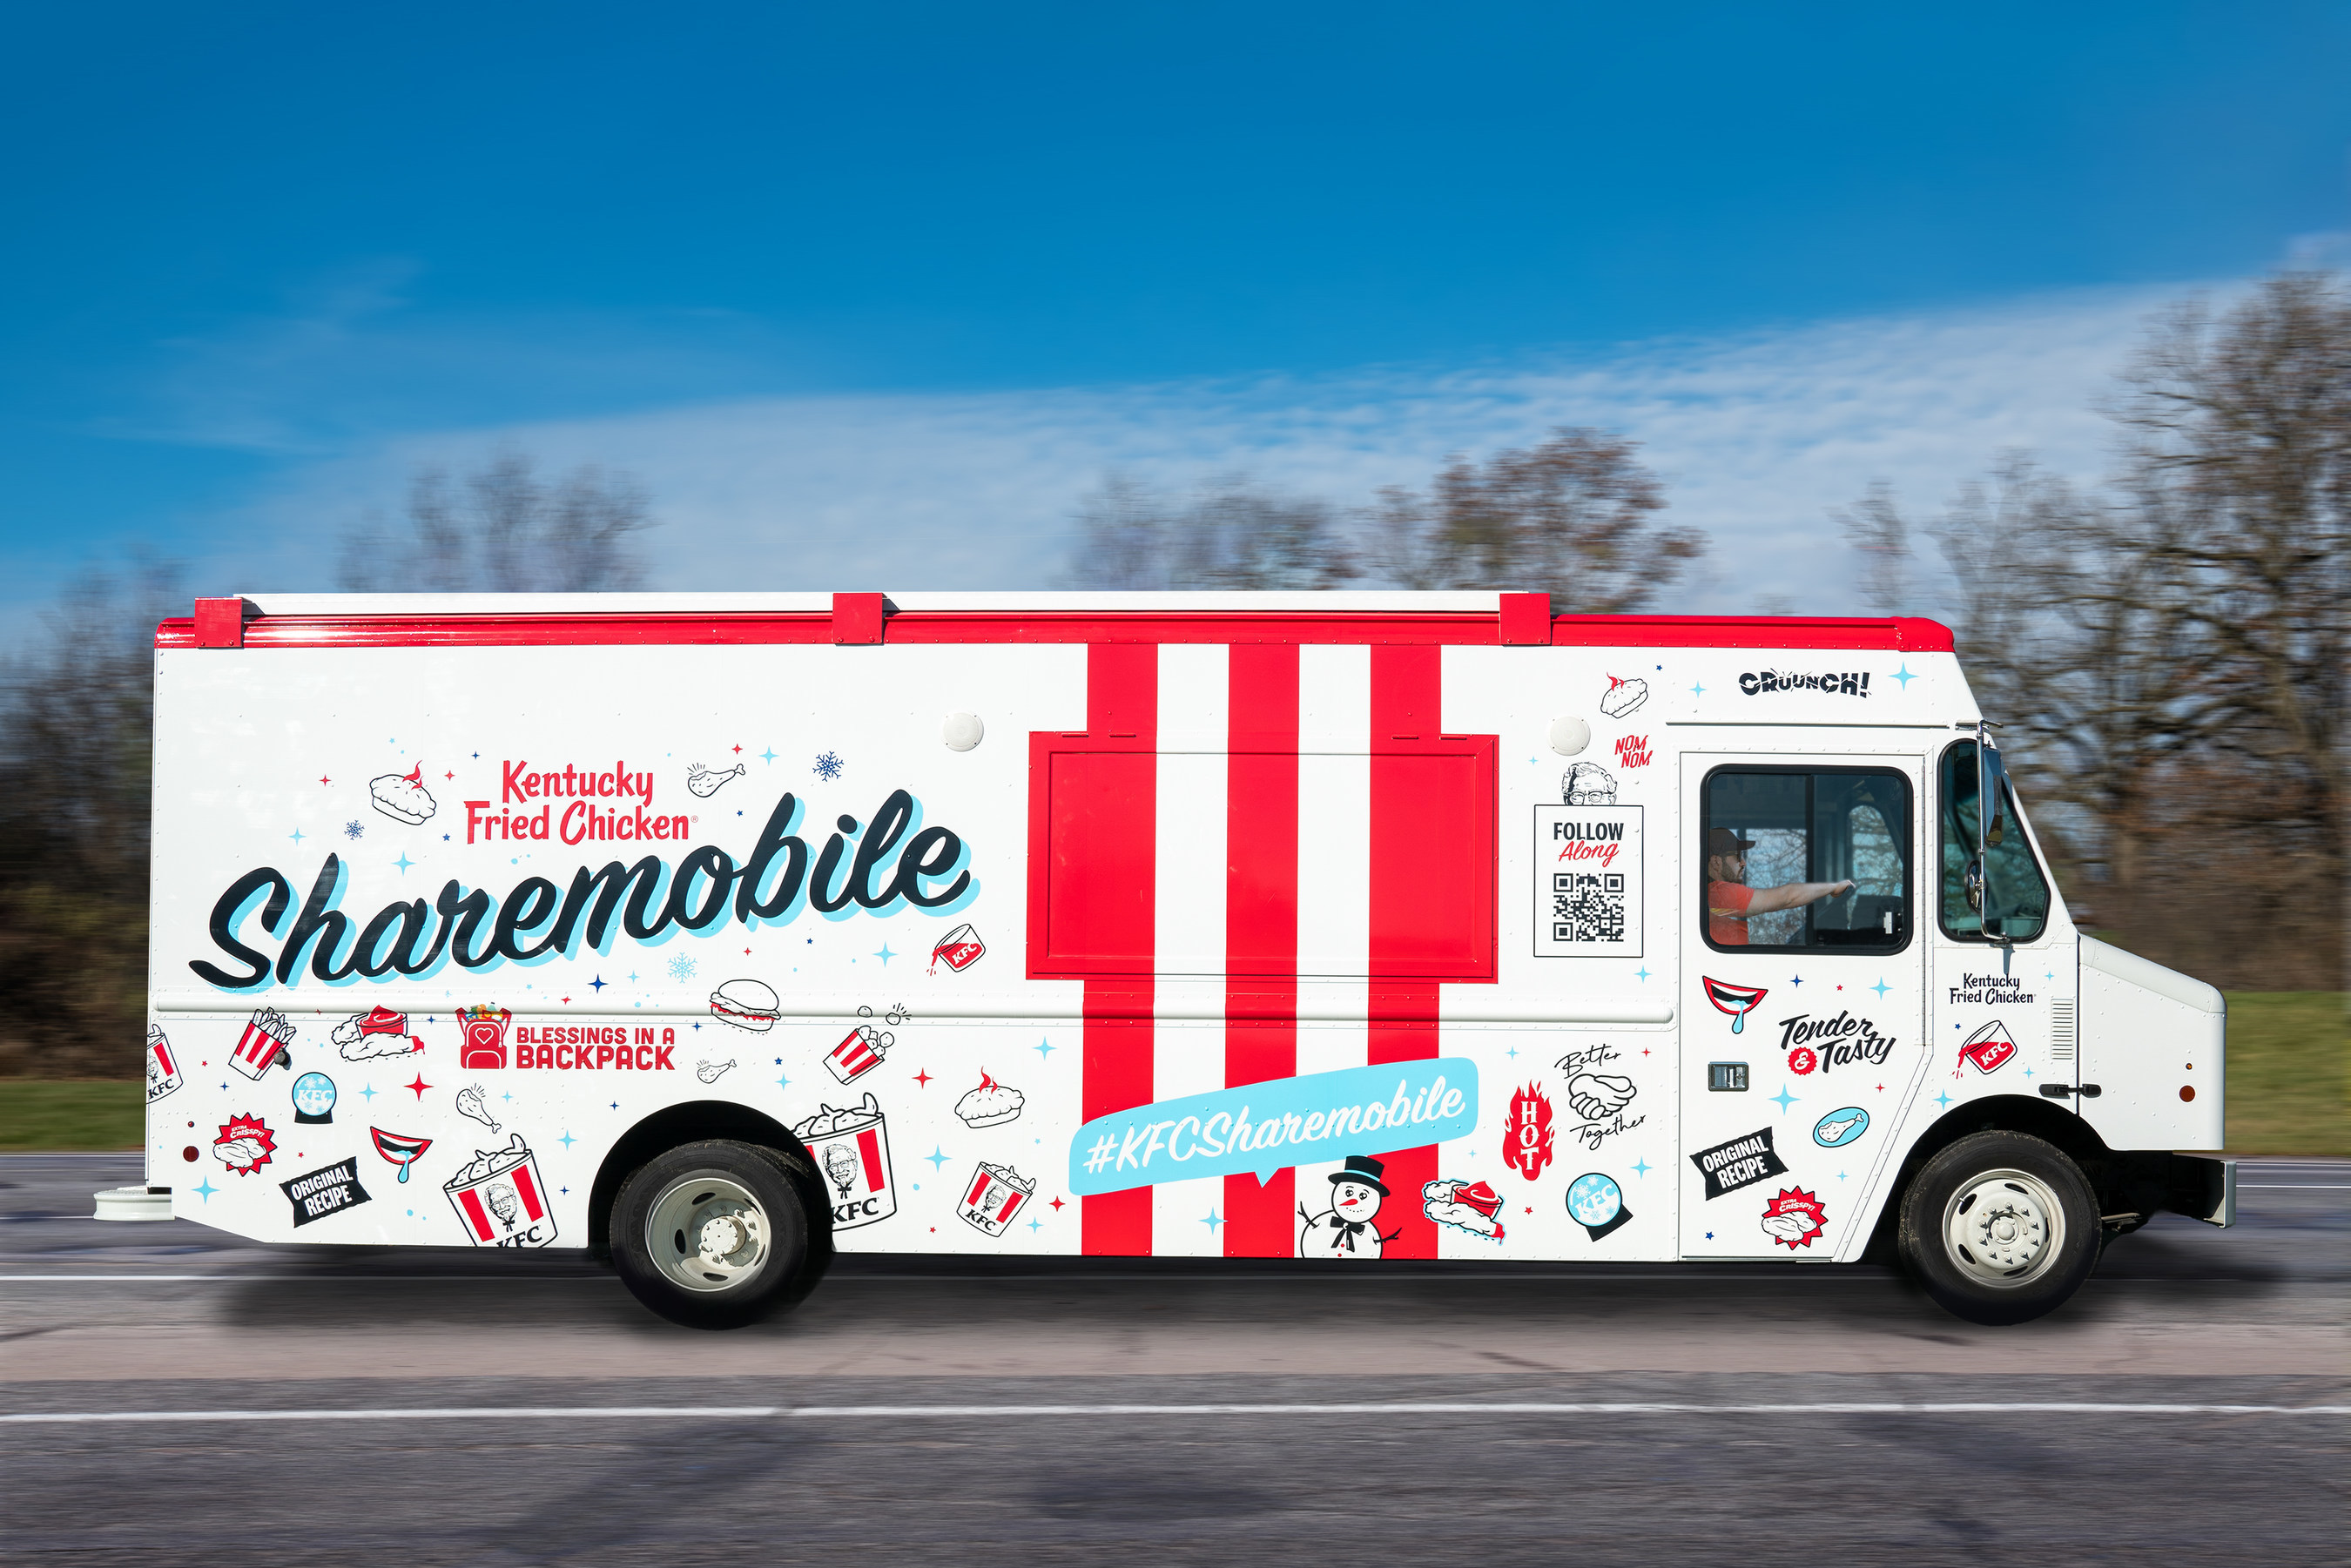 KFC® Launches Sharemobile Tour to Share Fried Chicken with Families this Holiday Season